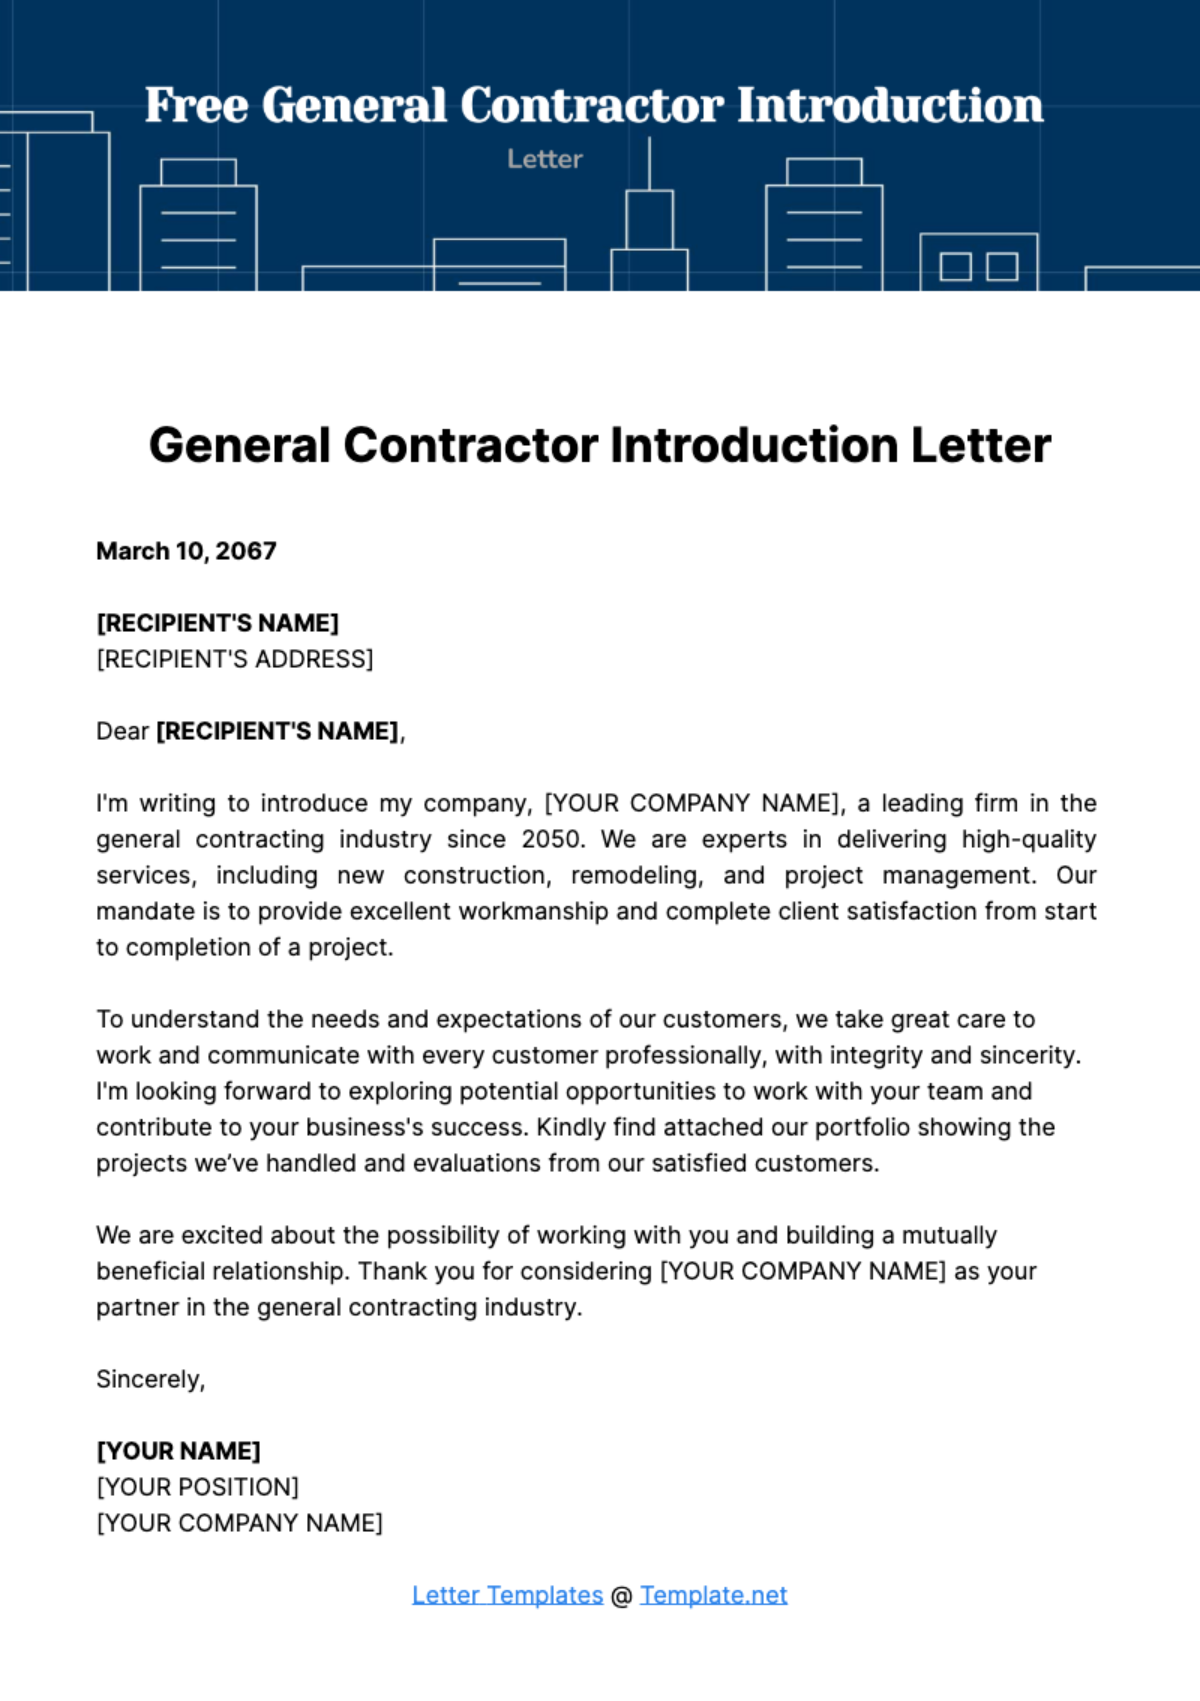 Free General Contractor Introduction Letter Template